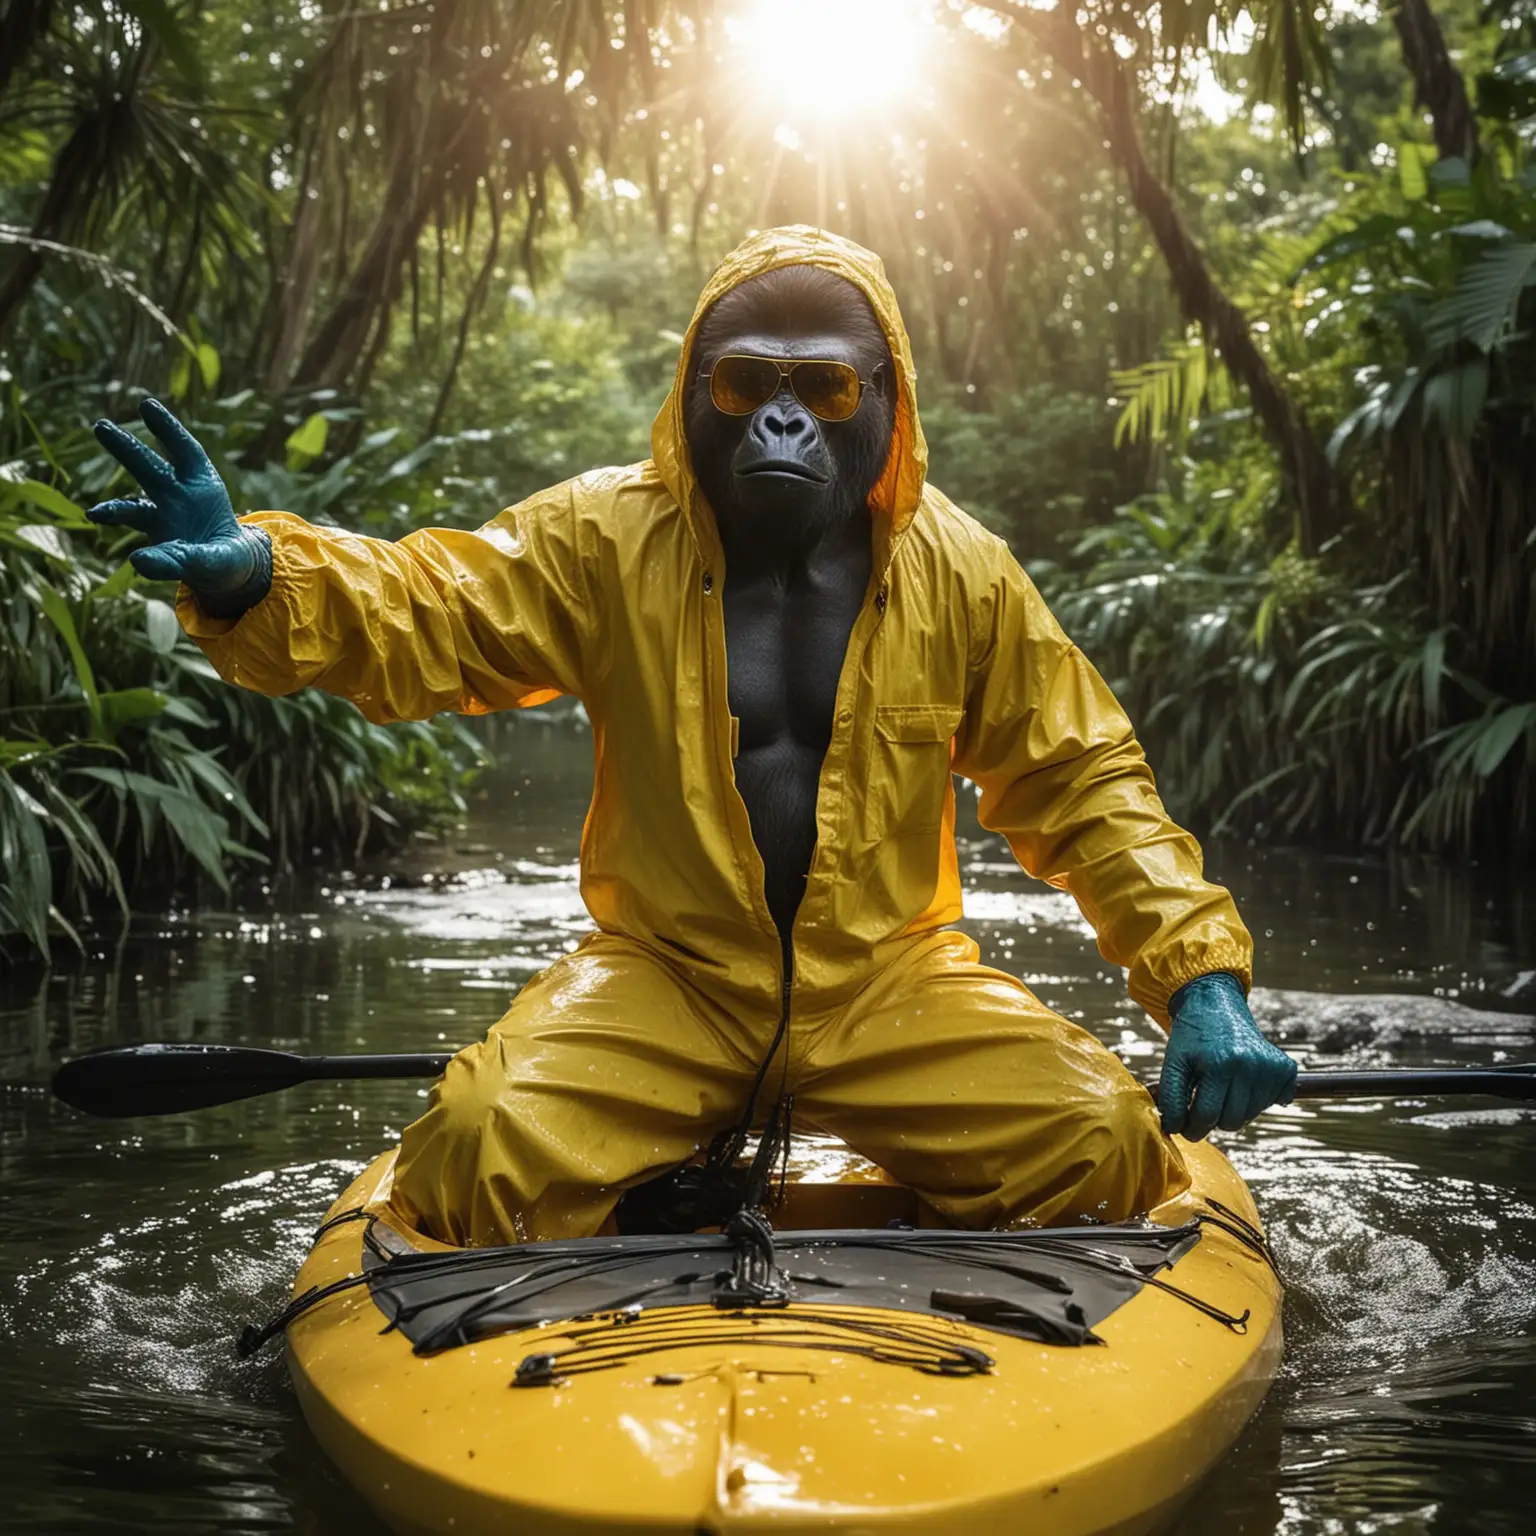 The gorilla is standing straight on top of a kayak, it's sunset, and he is navigating a river in the middle of the jungle, lots of green, trees and vegetation. The gorilla wears dark sunglasses (the sun reflects on his sunglasses) and a yellow jumpsuit like the one in the Breaking Bad series. His head is covered by the yellow hood. His hands are covered with light blue latex gloves. Many sexy women are around him in the water worshipping him .low angle camera view. movement.